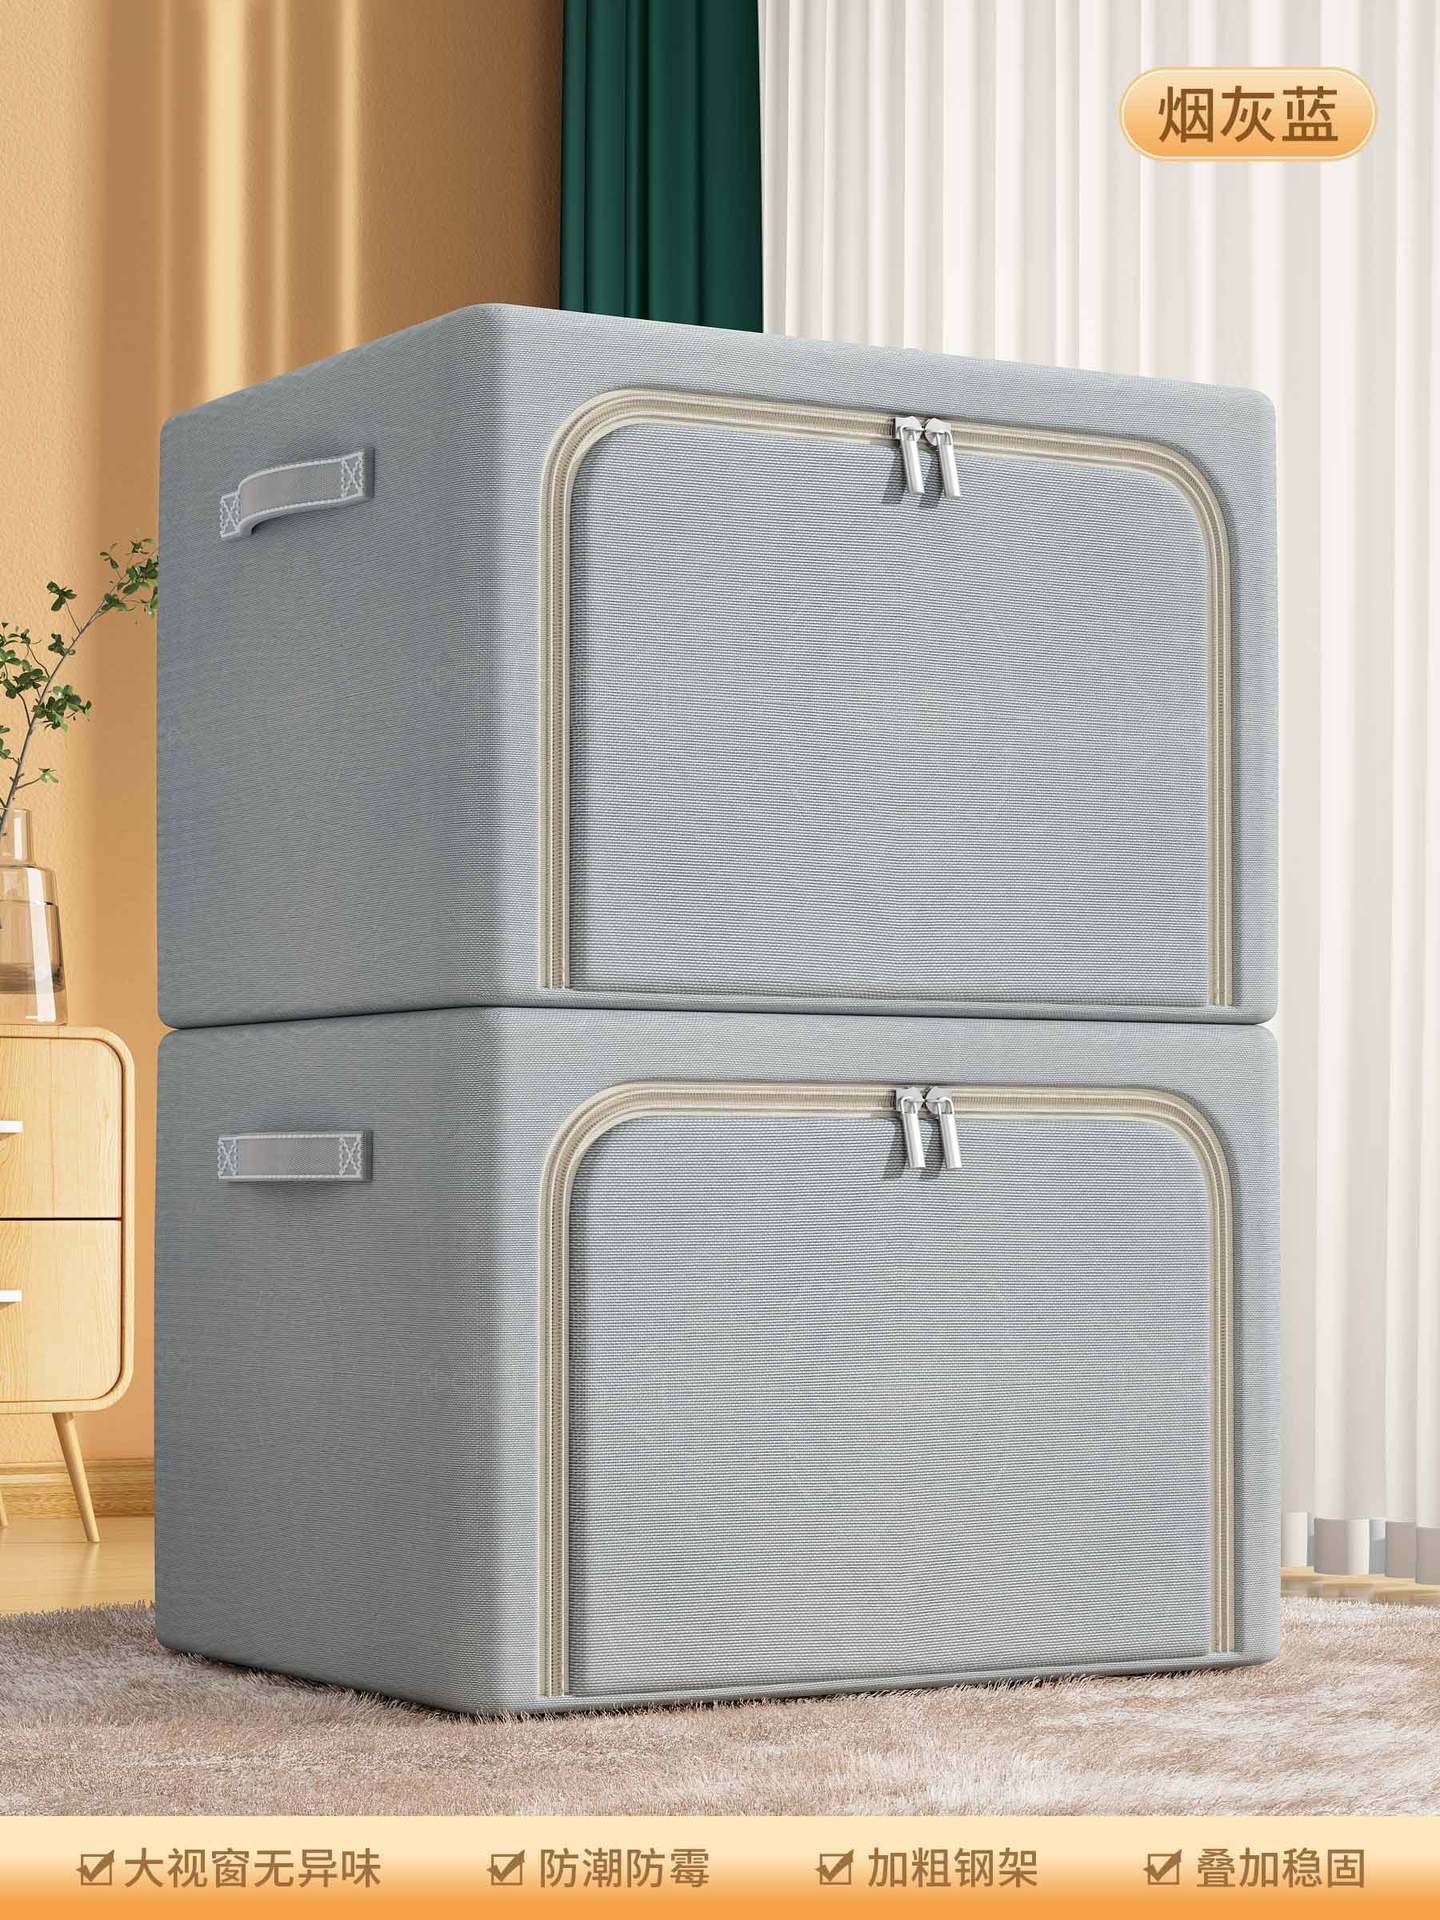 Solid Color Oxford Cloth Steel Frame Storage Box Clothing Foldable Storage Box Moving Quilt Clothes Storage Box Household